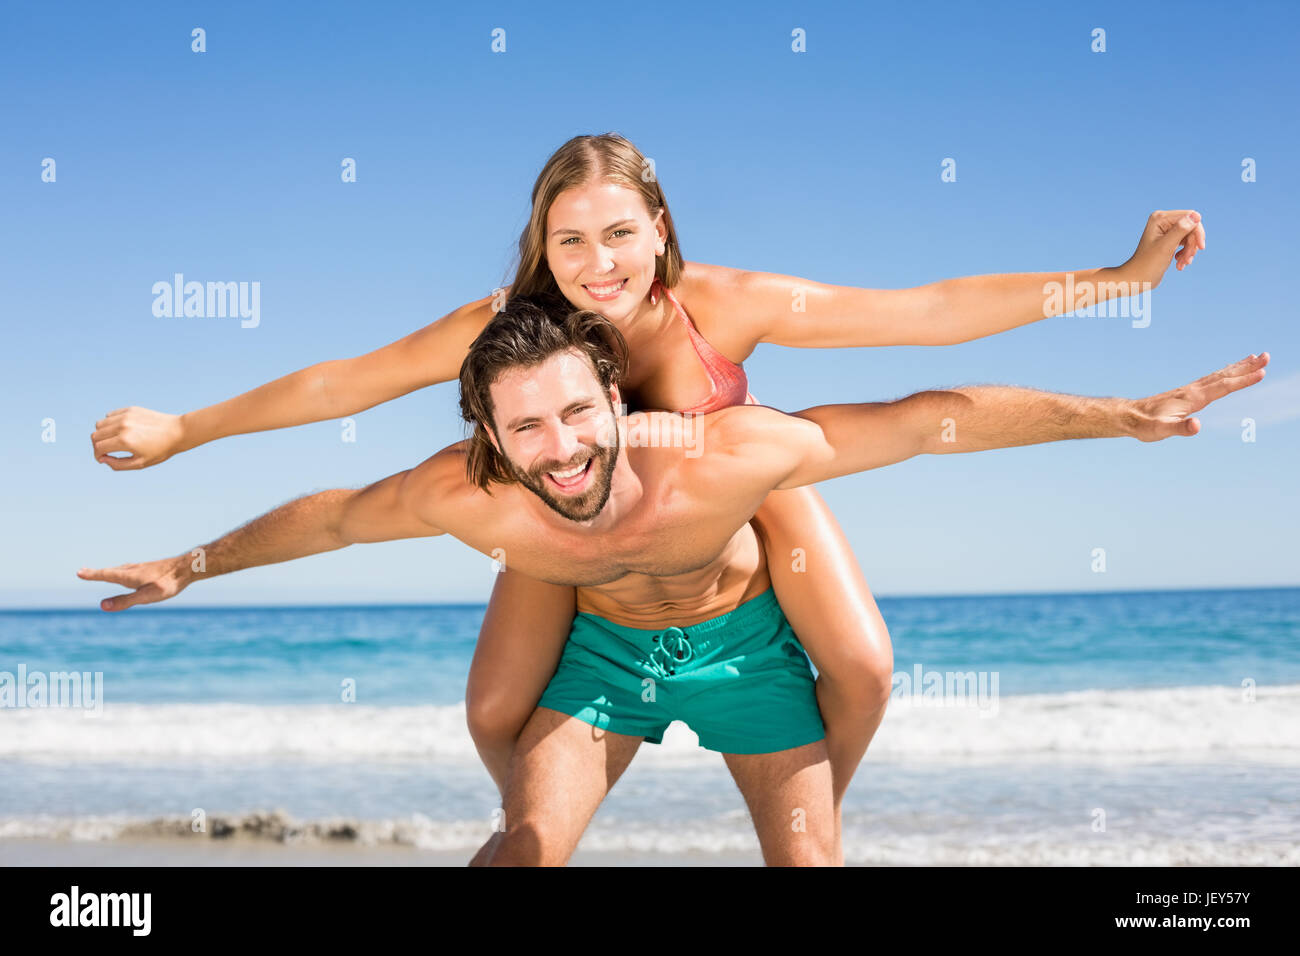 Man giving piggy back ride to woman Stock Photo